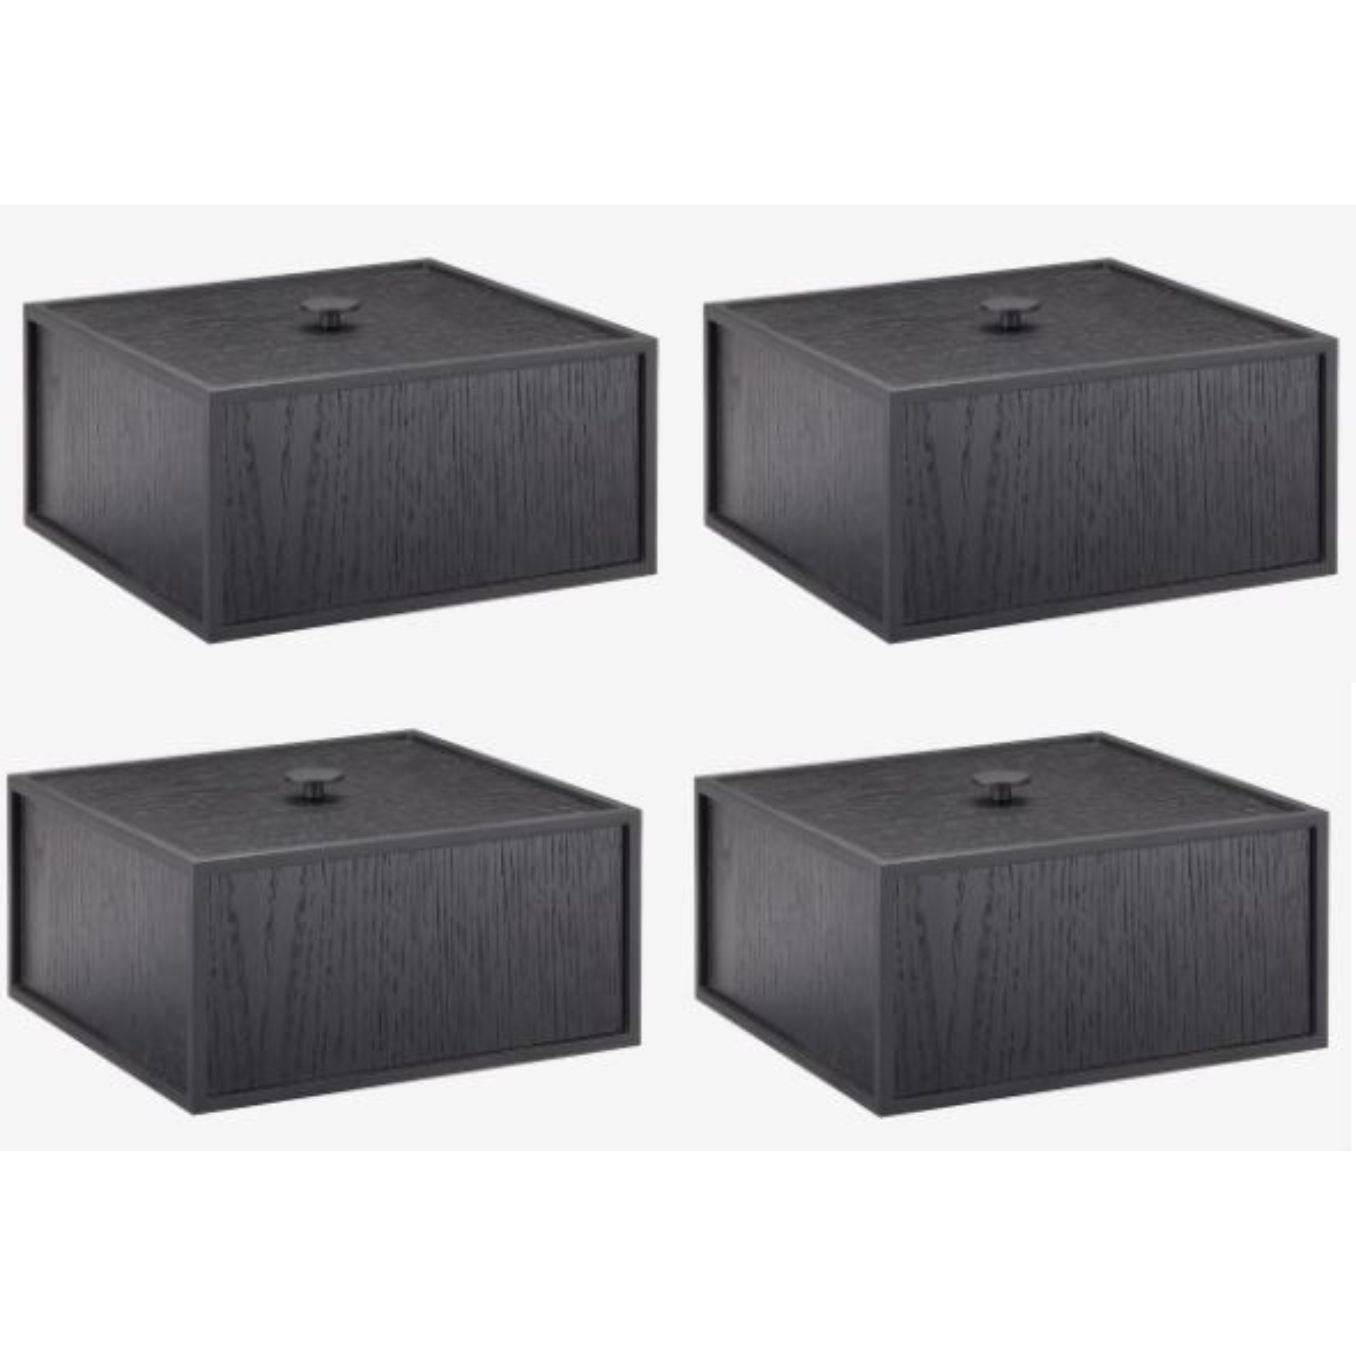 Set of 4 black ash frame 20 box by Lassen
Dimensions: D 20 x W 20 x H 10 cm 
Materials: Melamin, Melamine, Metal, Veneer
Weight: 2.00 Kg

Frame Box is a square box in a cubistic shape. The simple boxes are inspired by the Kubus candleholder by